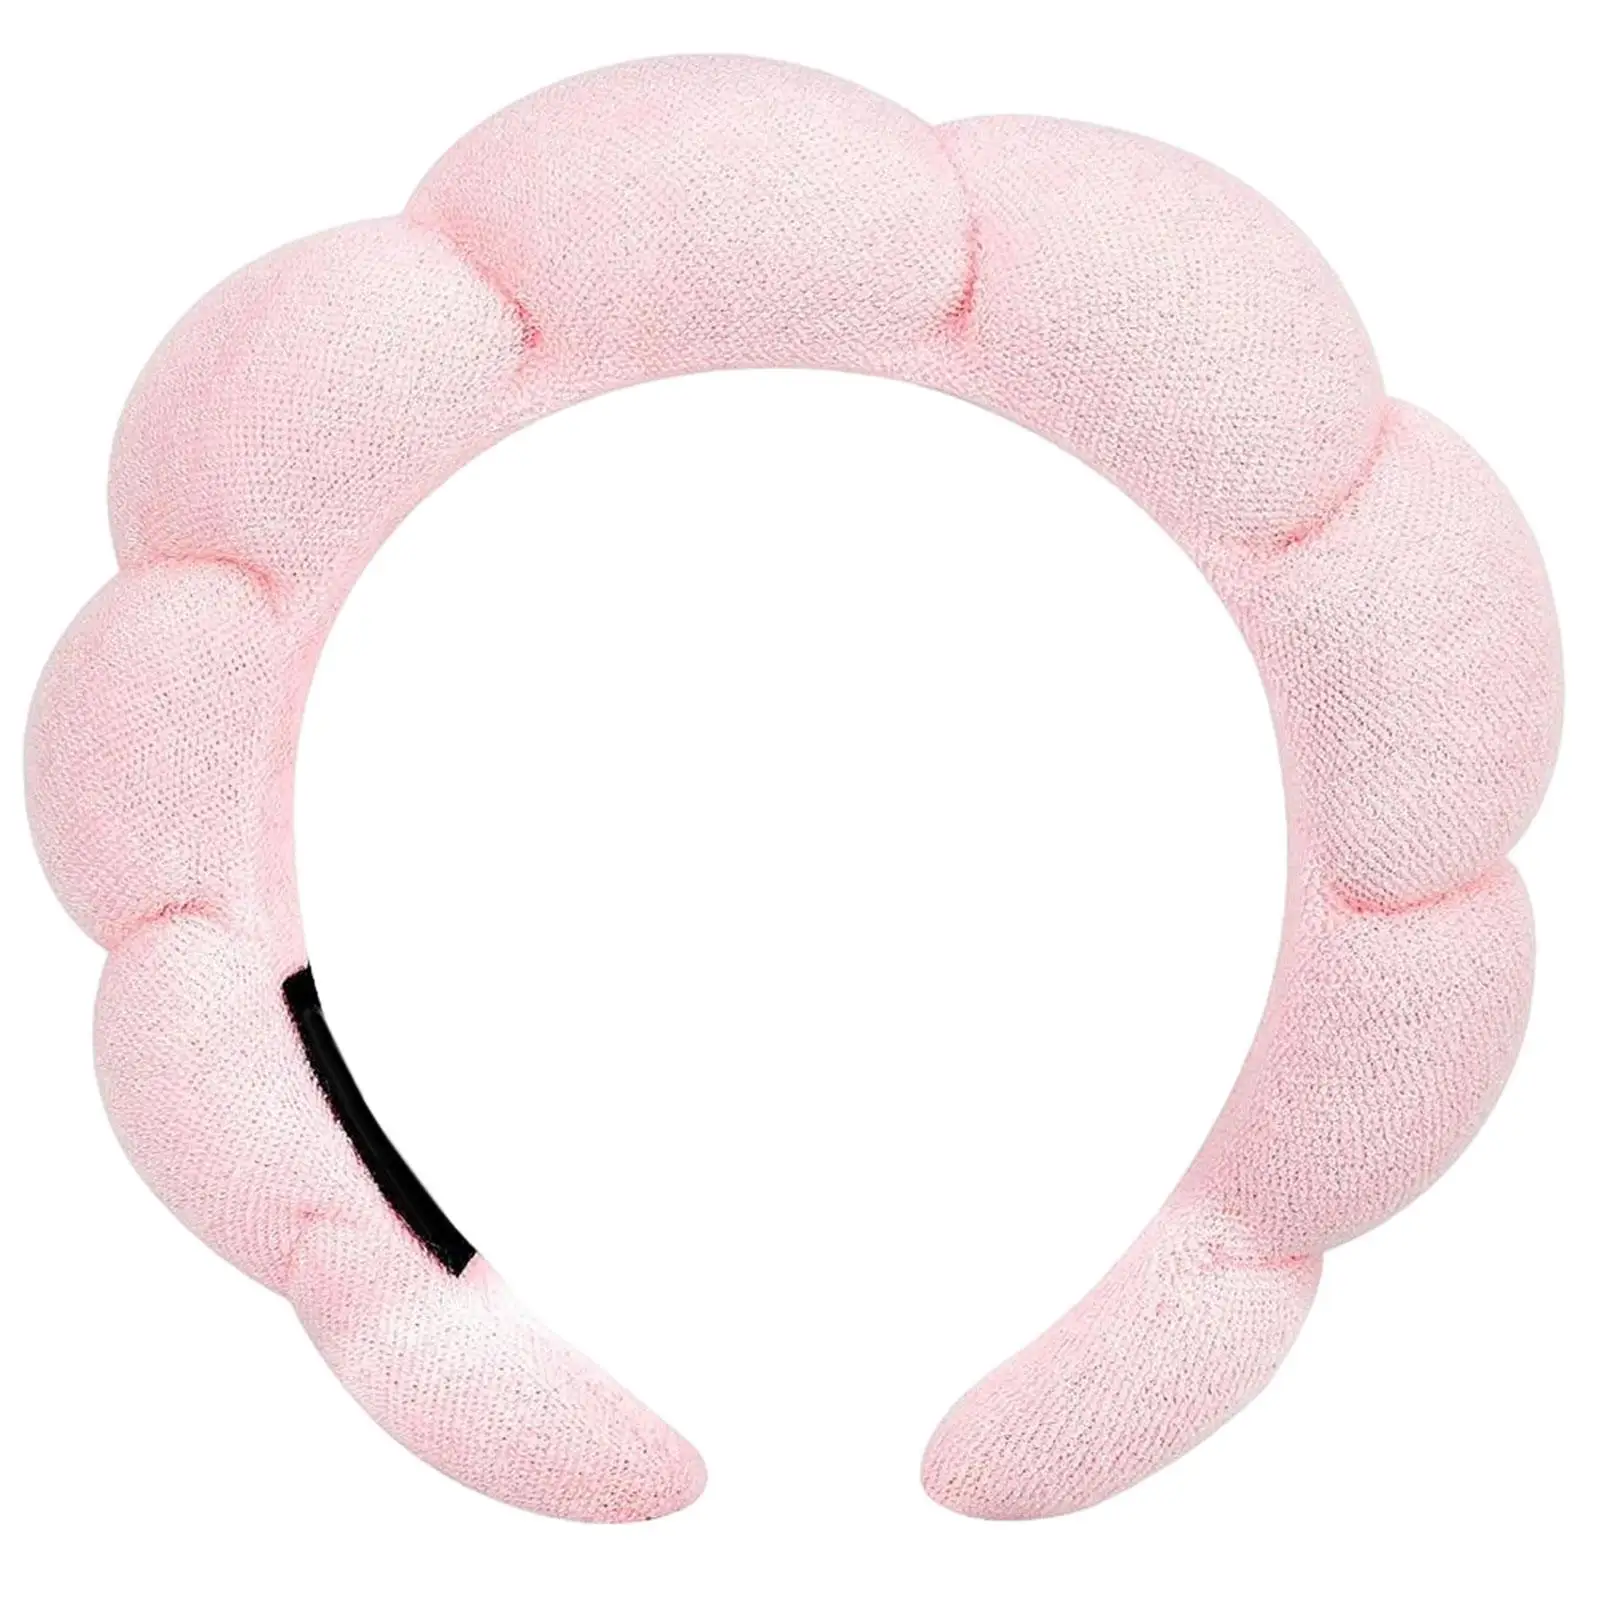 makeup Sponge Headband Thick Water Absorbent for Shower Facial Cleansing